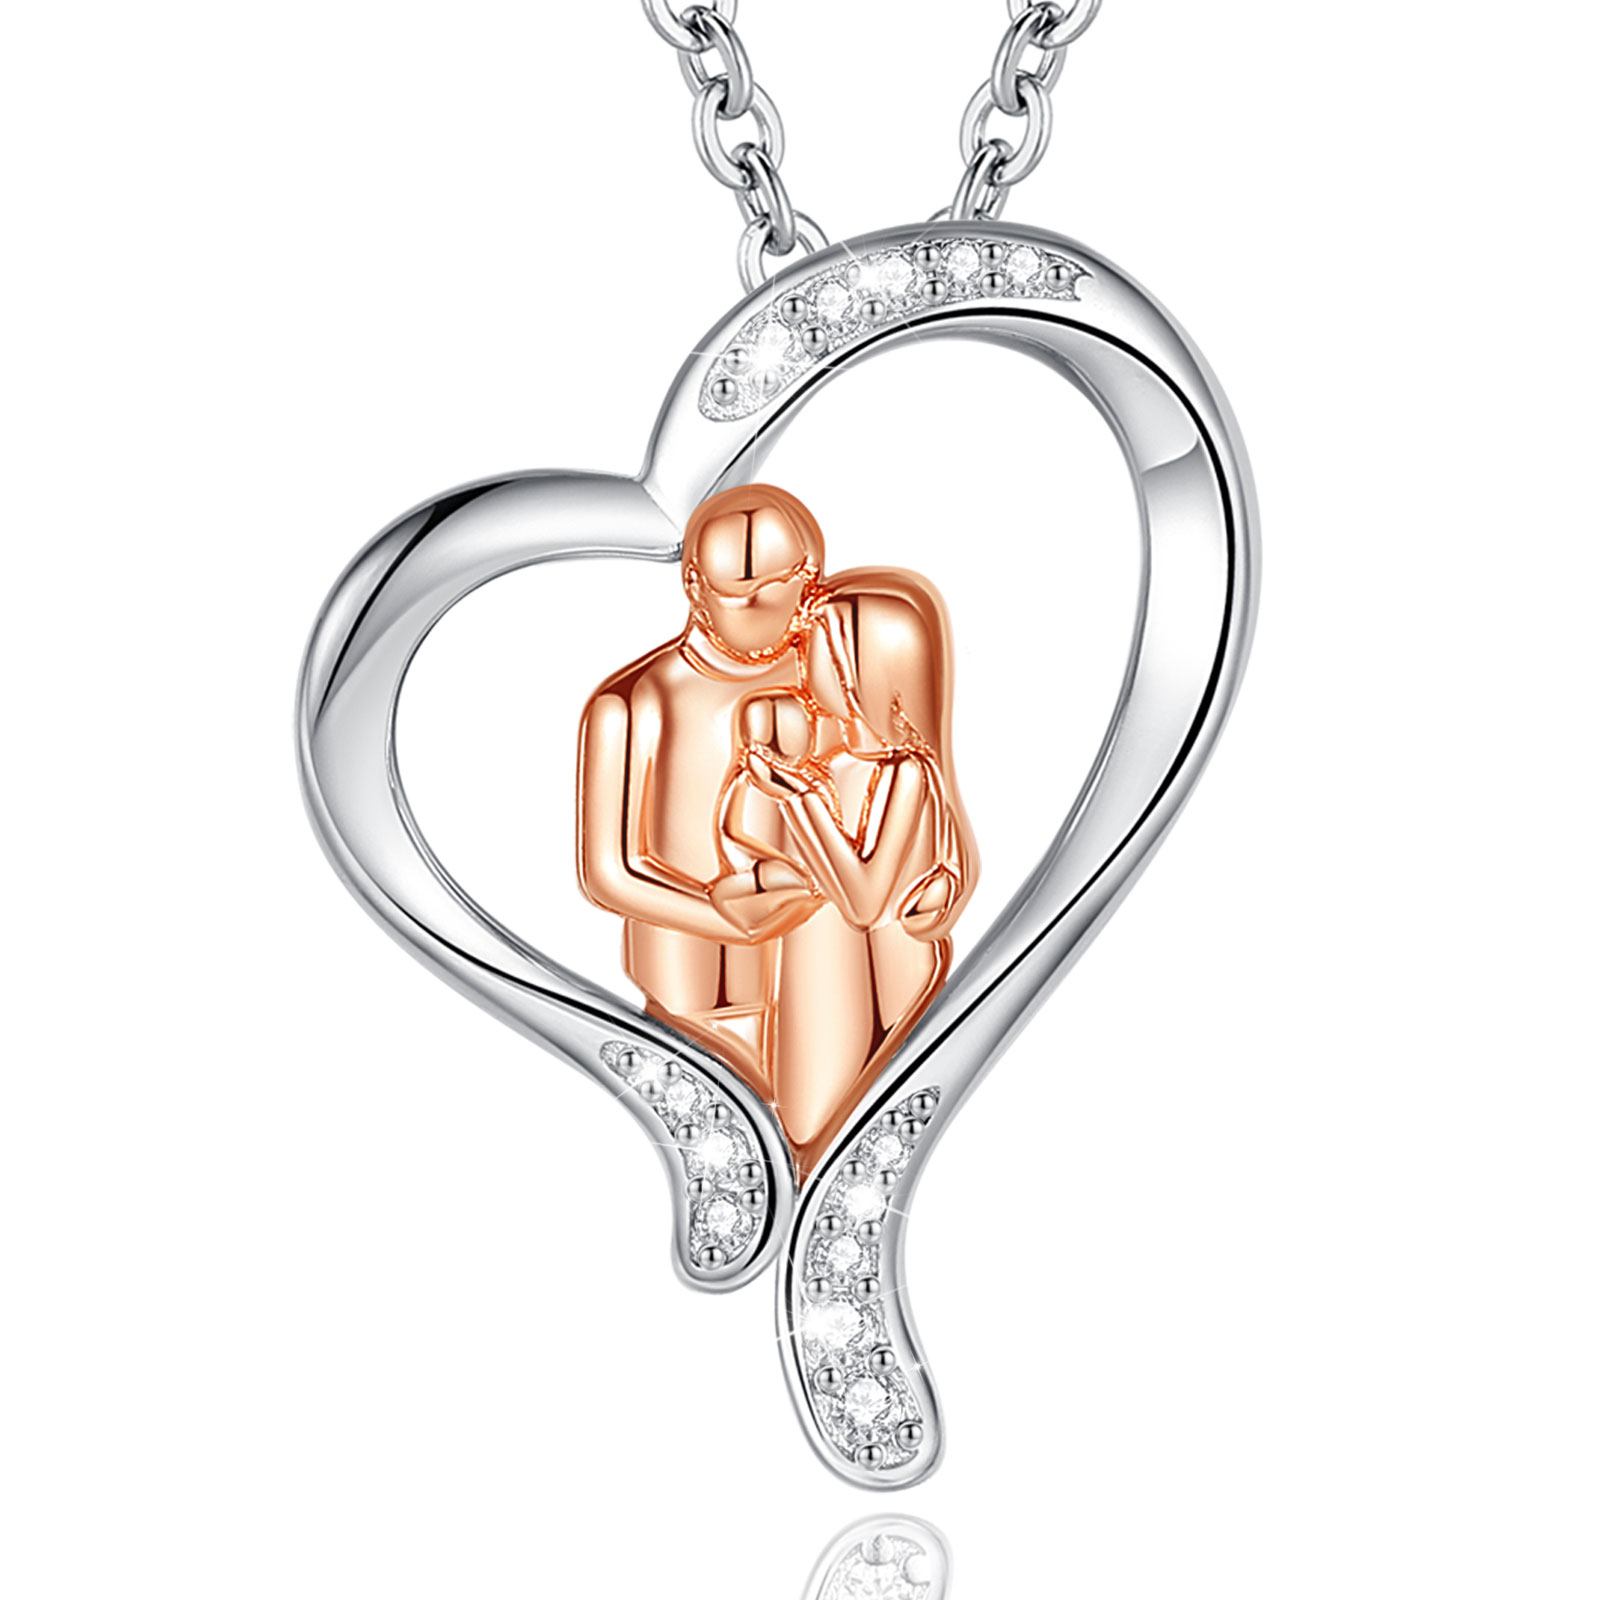 Merryshine Jewelry S925 Sterling Silver Father and Mother Baby Heart Family Necklace